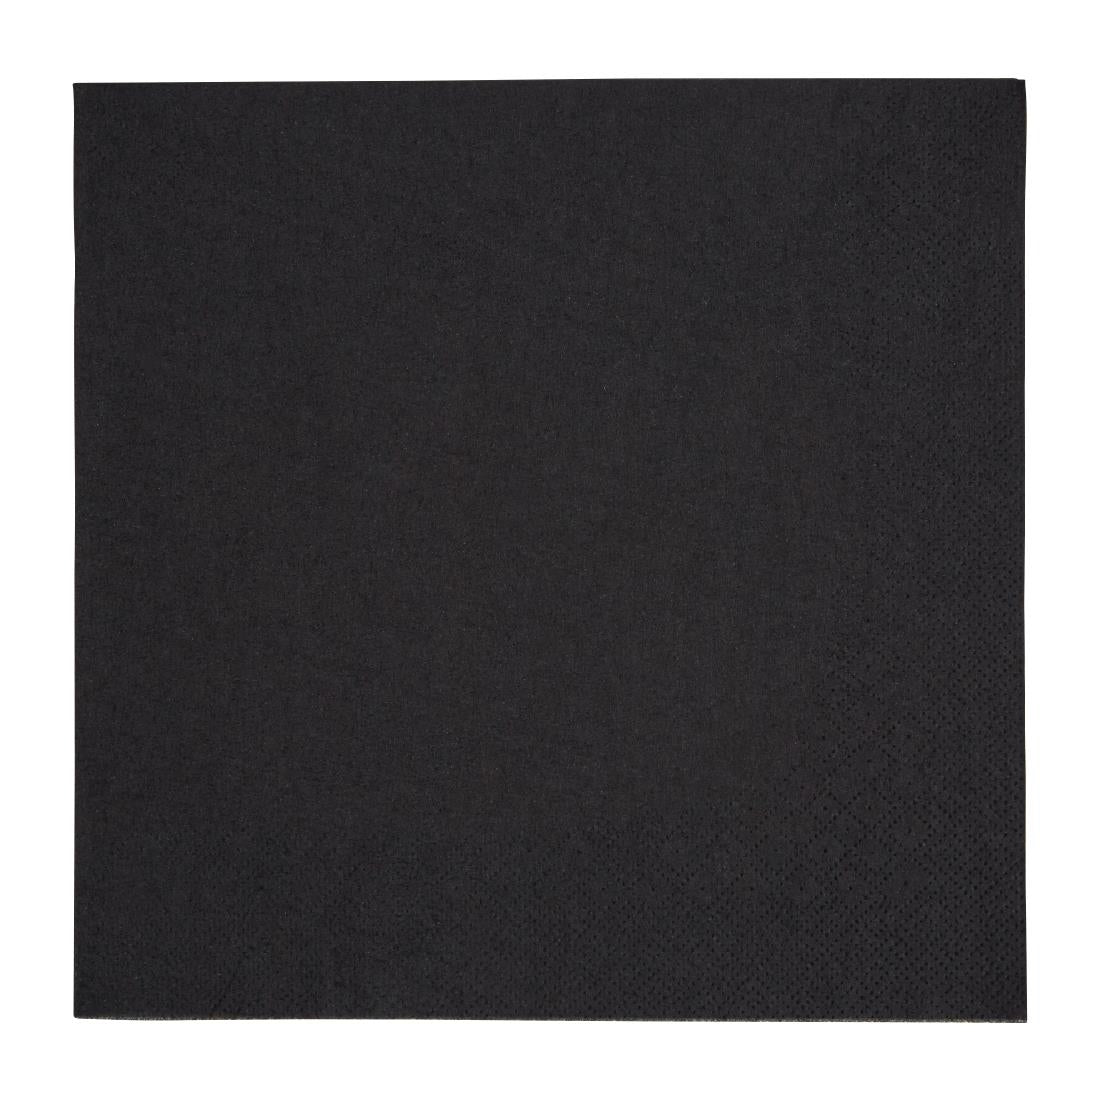 FE257 Fiesta Recyclable Dinner Napkin Black 40x40cm 3ply 1/4 Fold (Pack of 1000) JD Catering Equipment Solutions Ltd